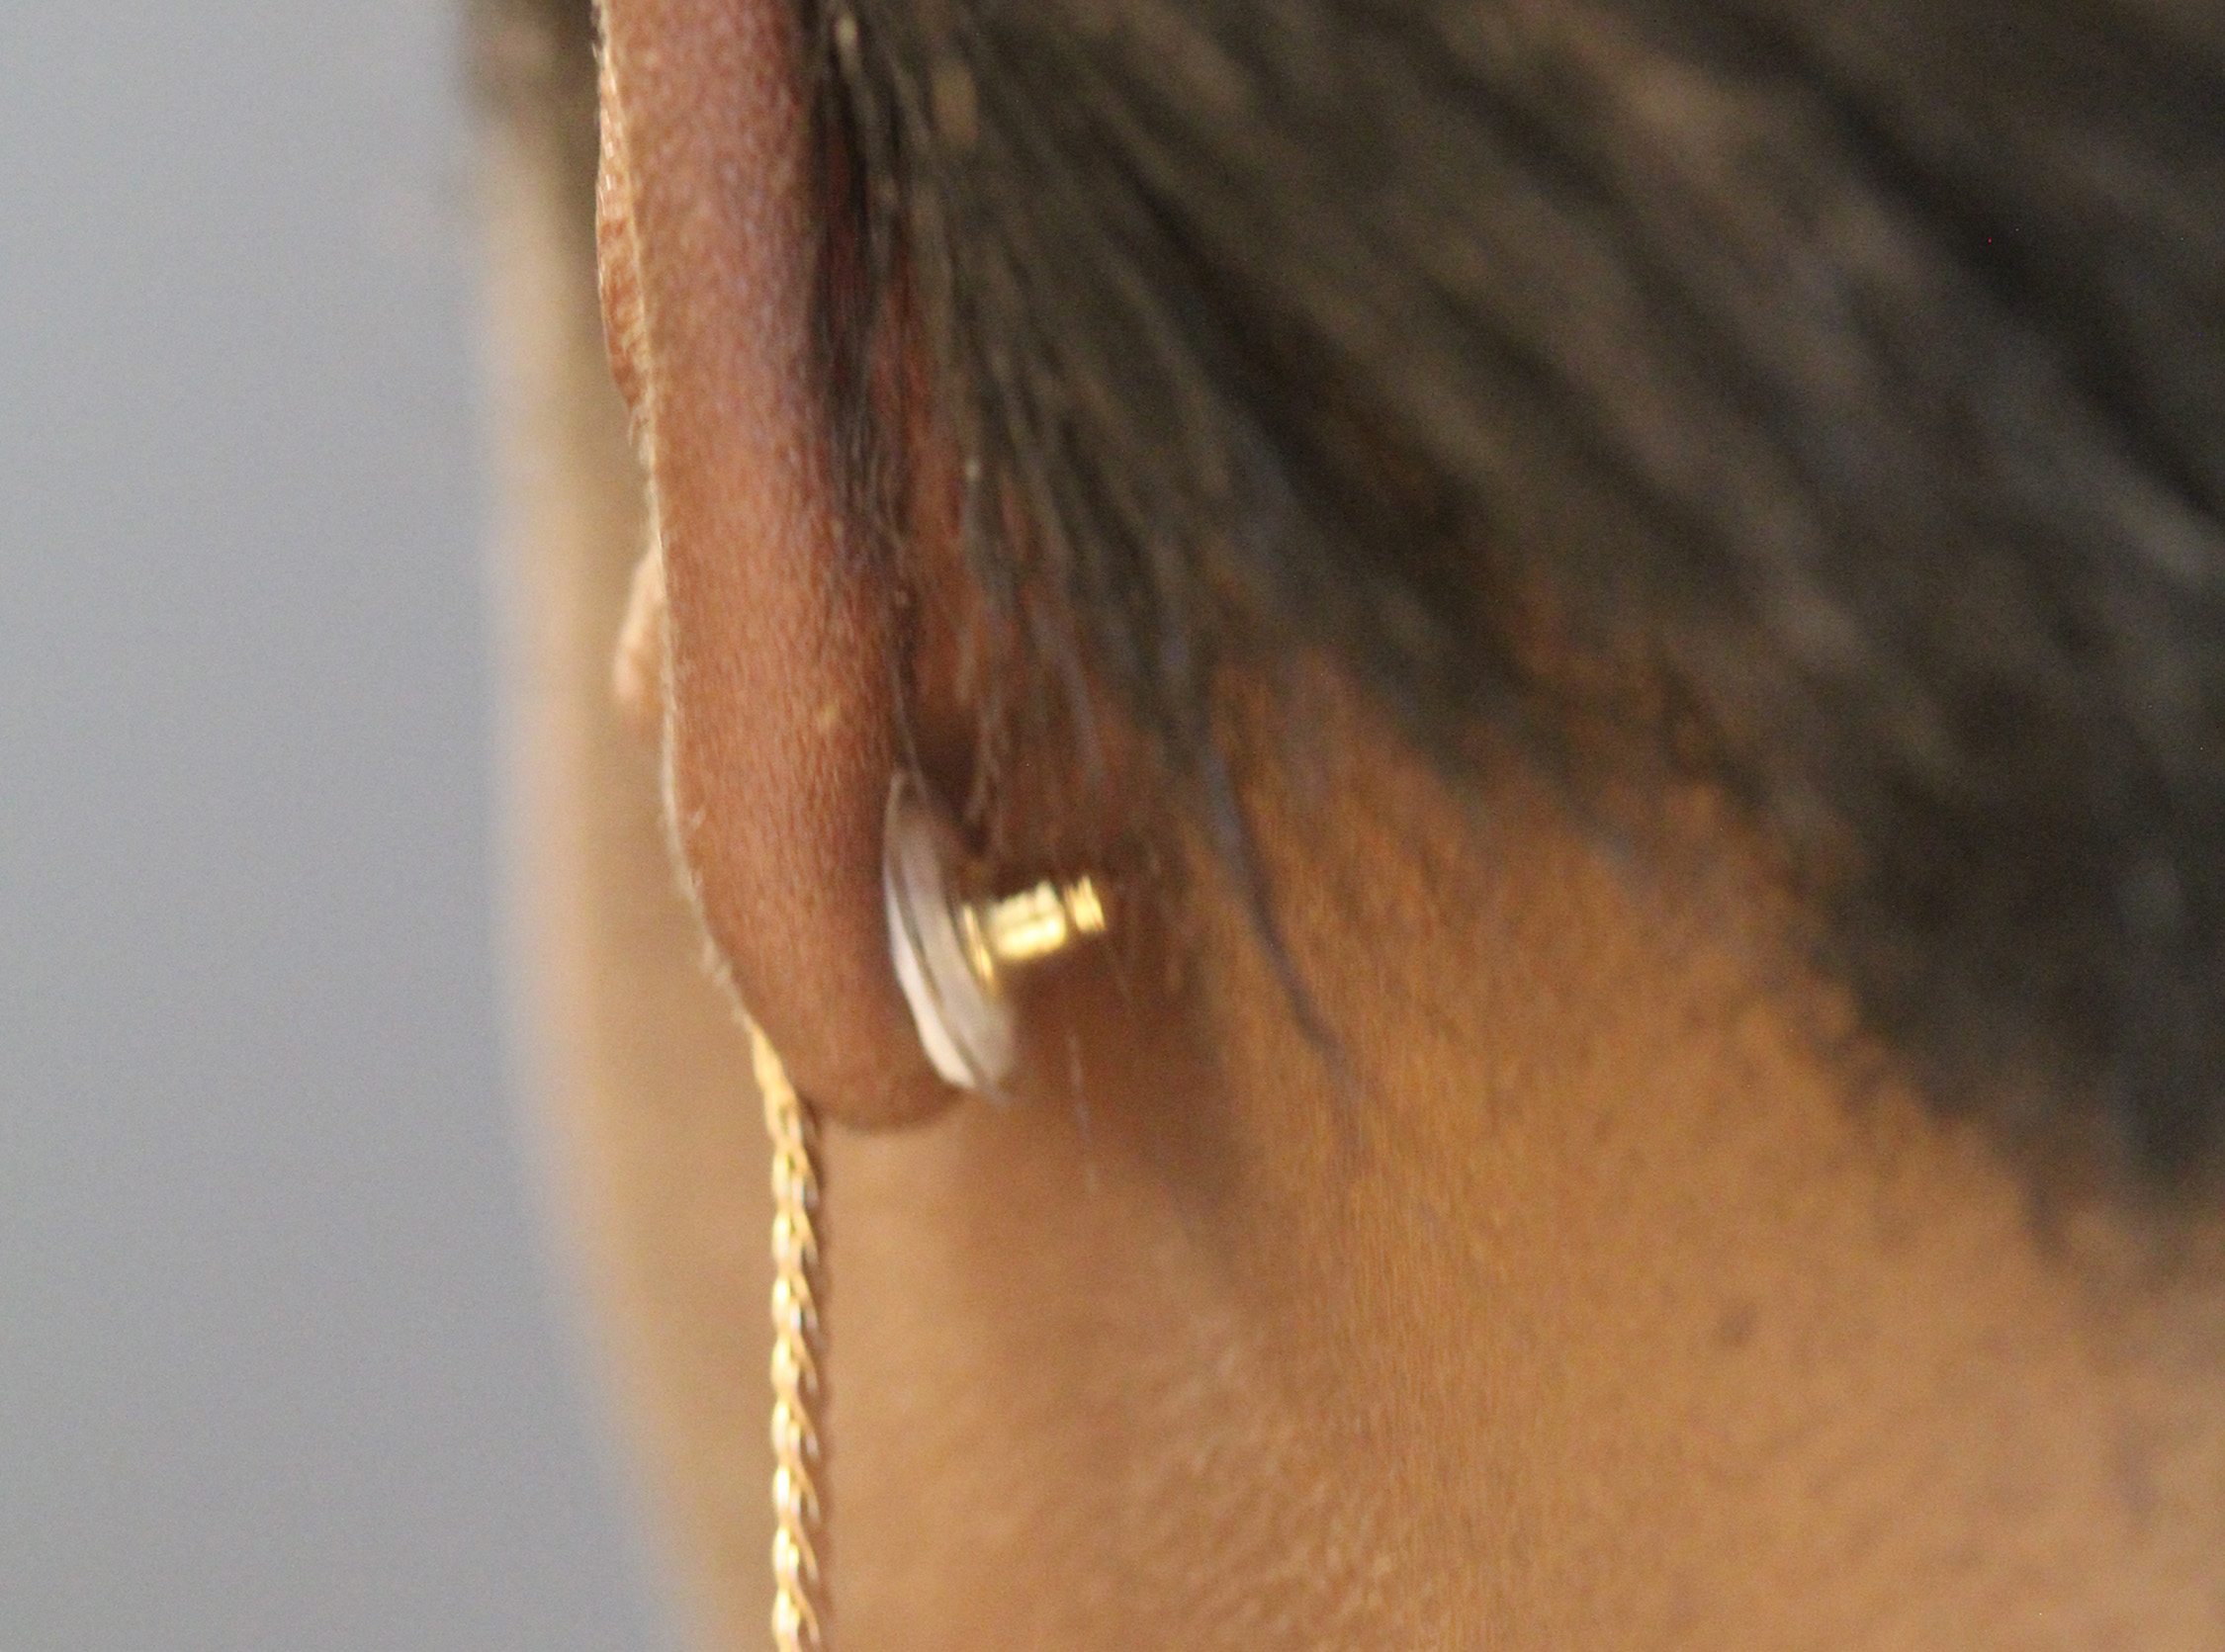 A contraceptive earring patch is shown as it would be worn on a woman’s ear. The white contraceptive patch can be seen attached to the earring back and adhered to the back of the ear. (Credit: Mark Prausnitz, Georgia Tech)